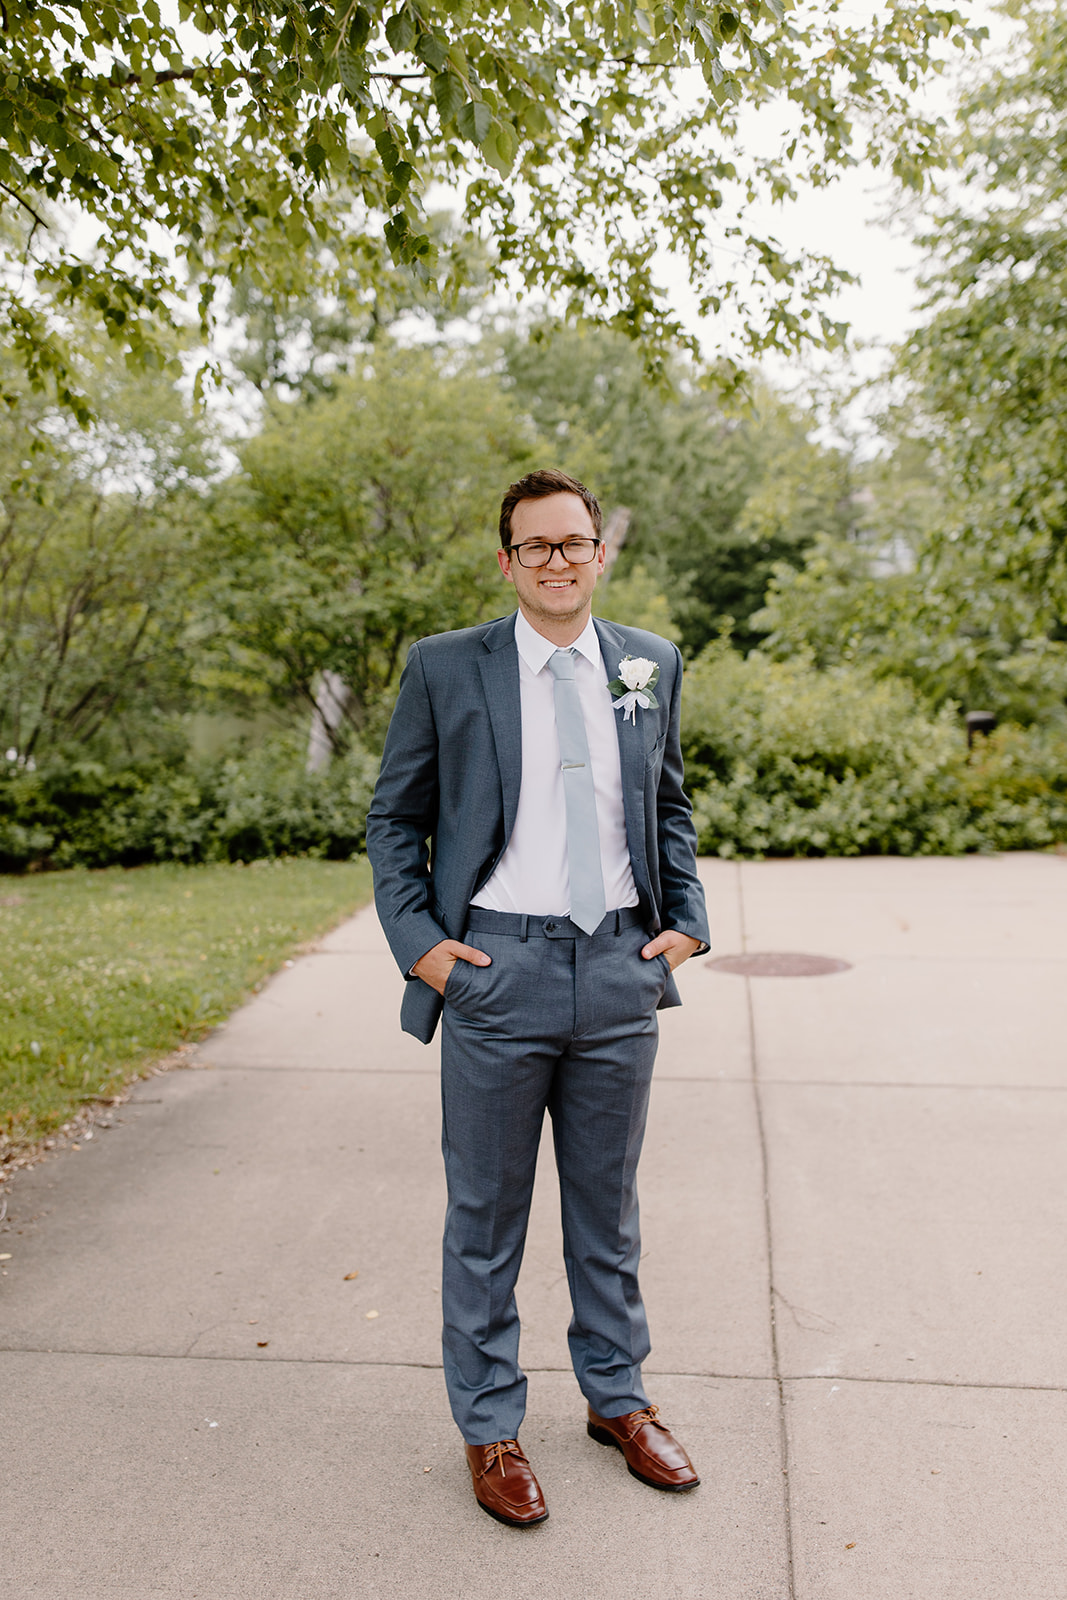 Groom smiles at the camera with his hands in his pockets